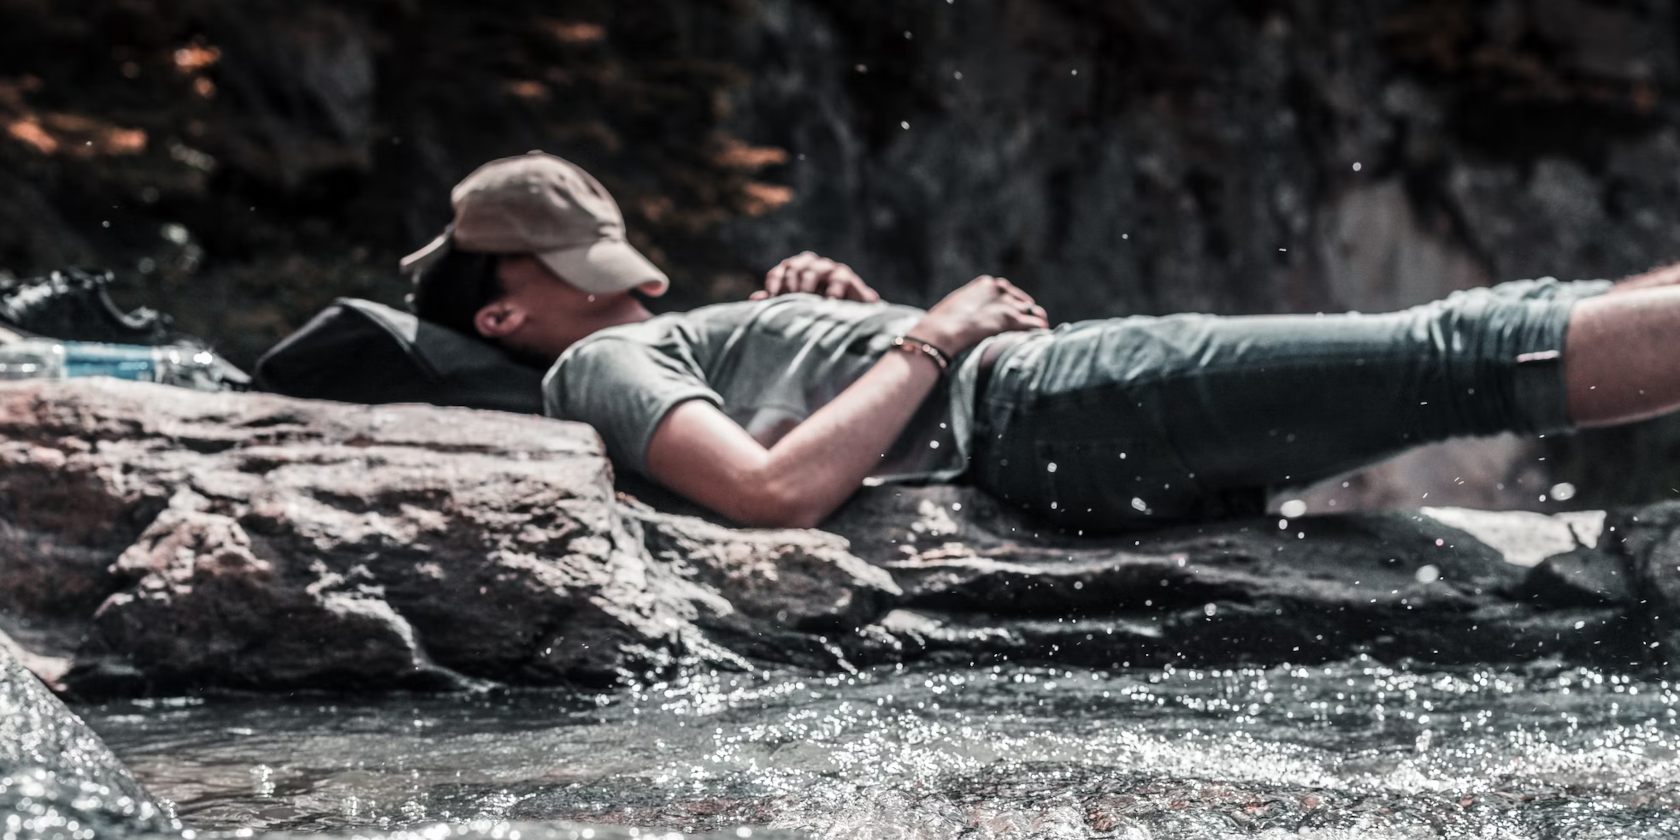 A man asleep on a rock in the middle of a river. His cap is over his face